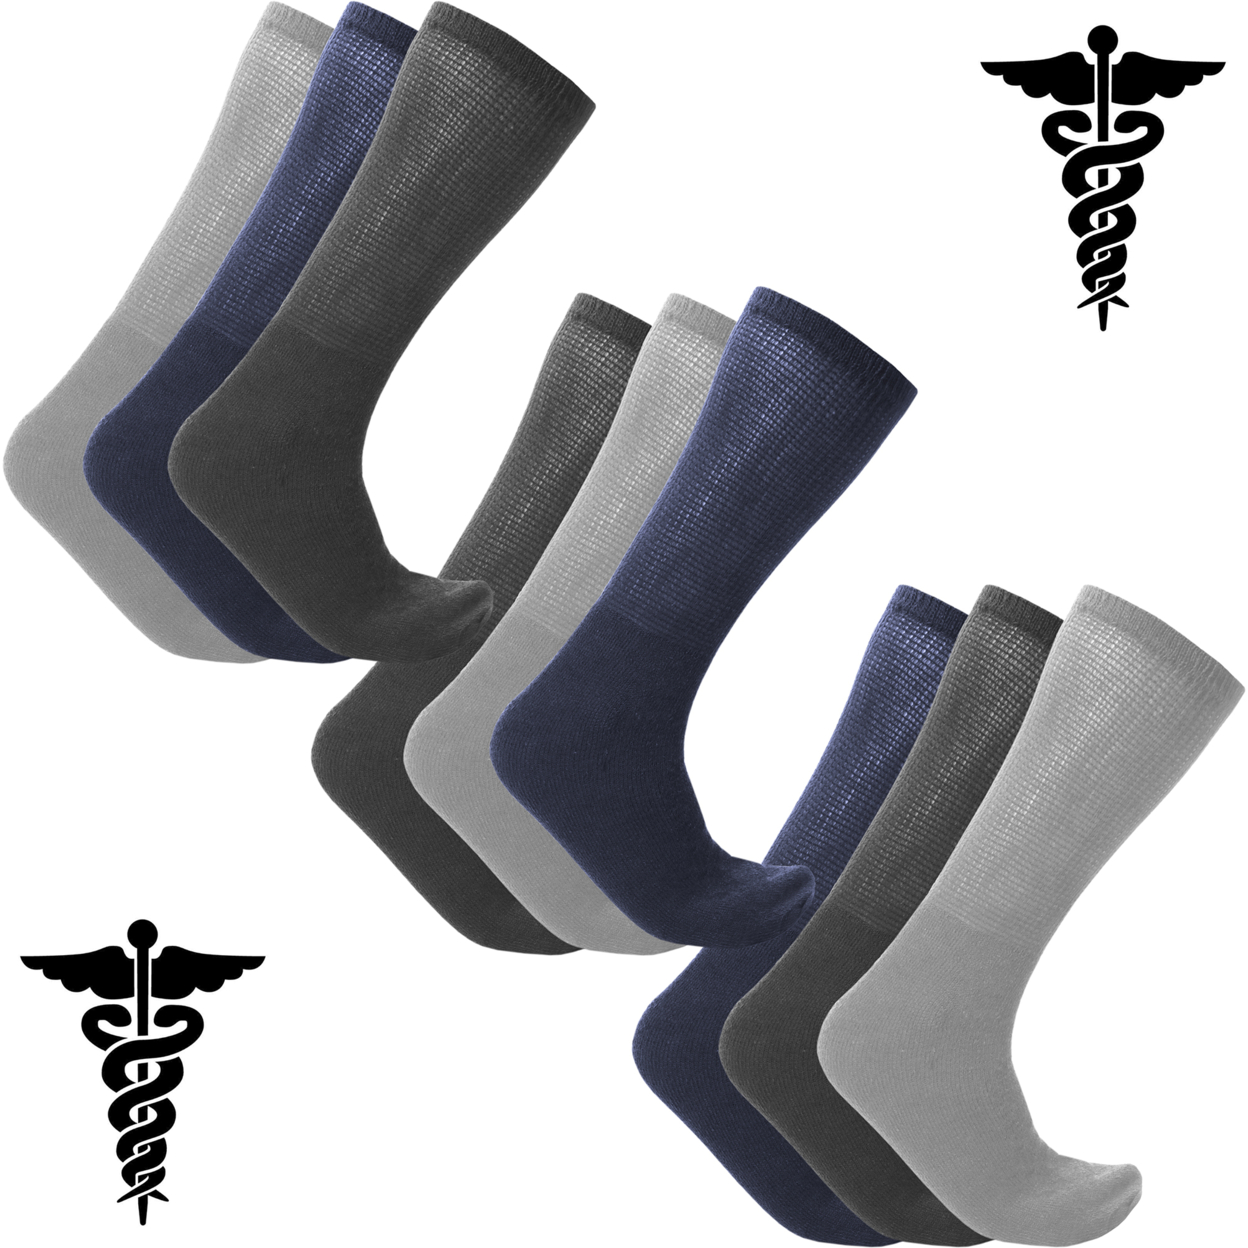 6-Pairs: Physician Approved Therapeutic Diabetic Socks - Assorted, Women's